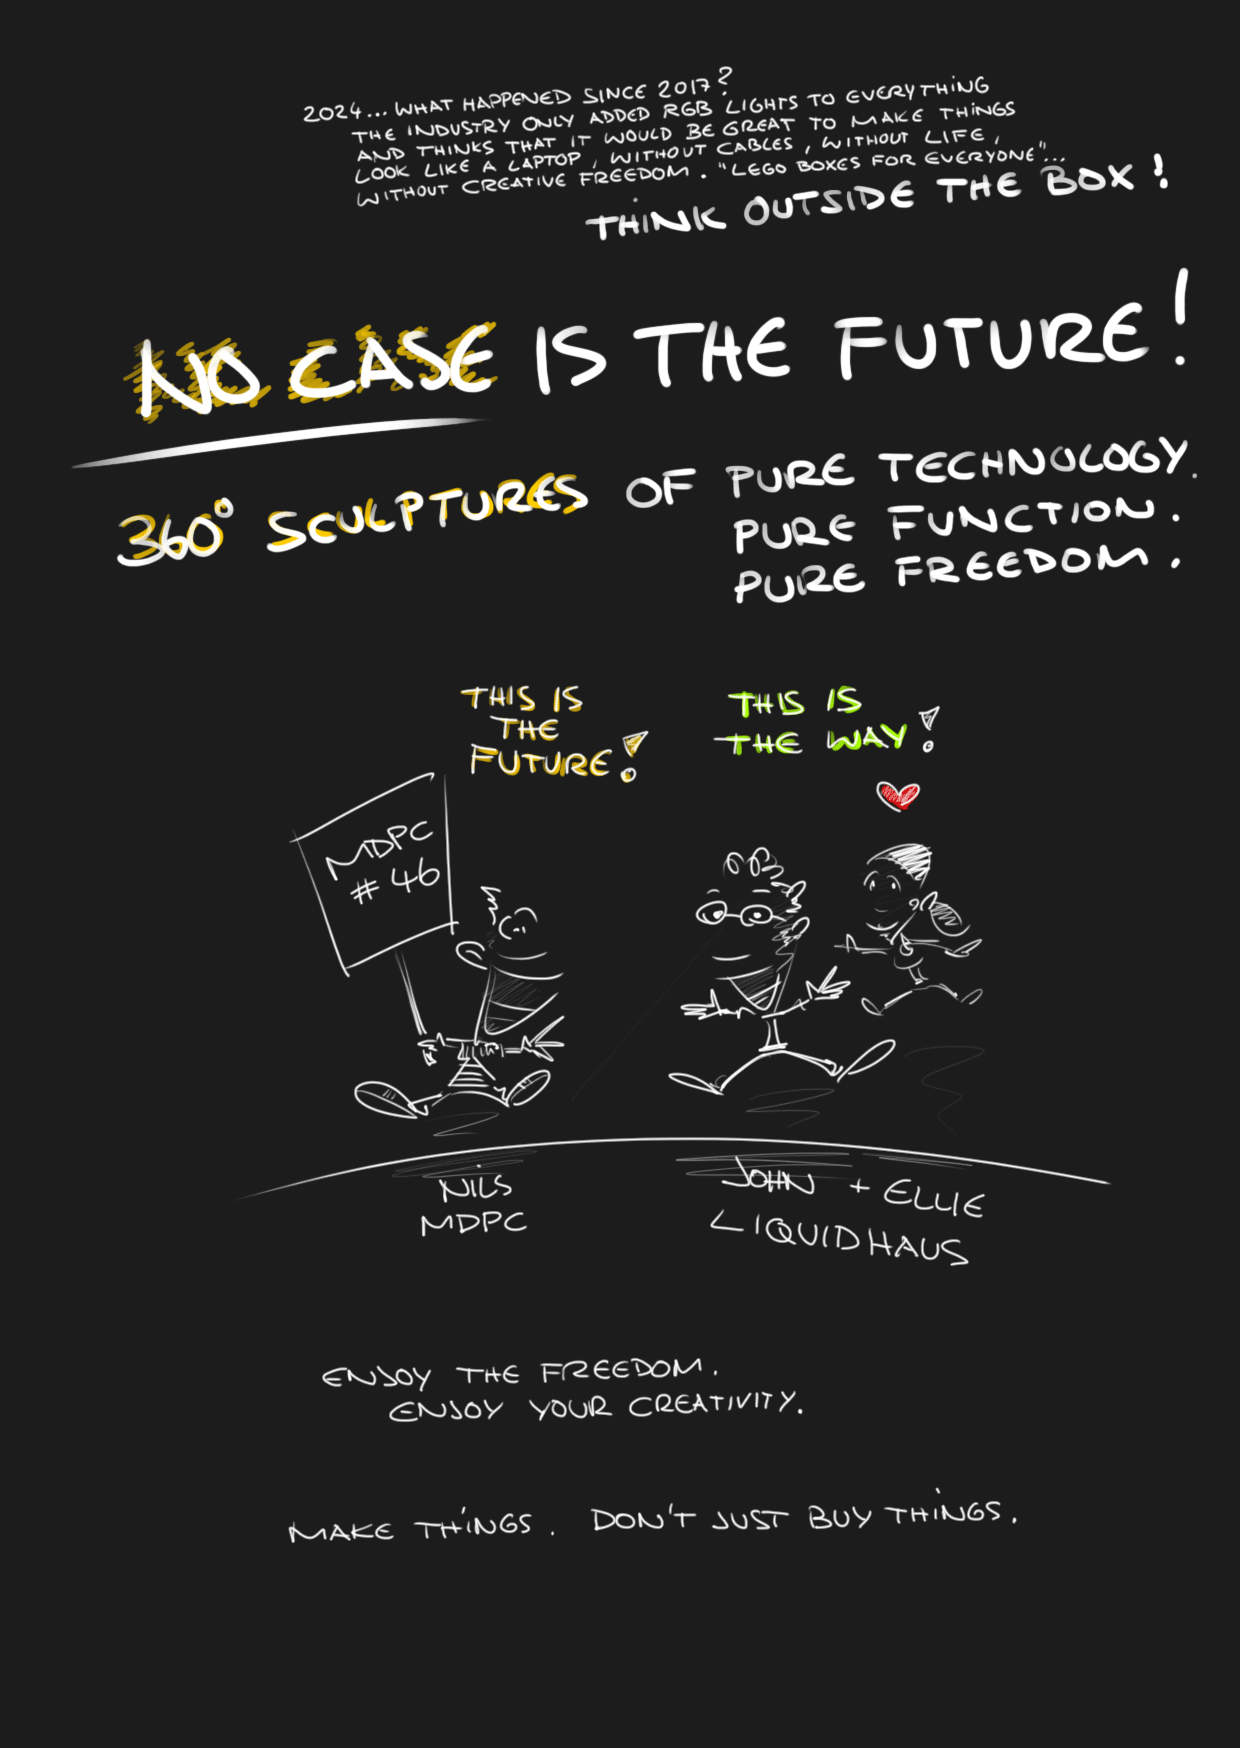 This is the future: No case, no compromise. By Liquidhaus.
